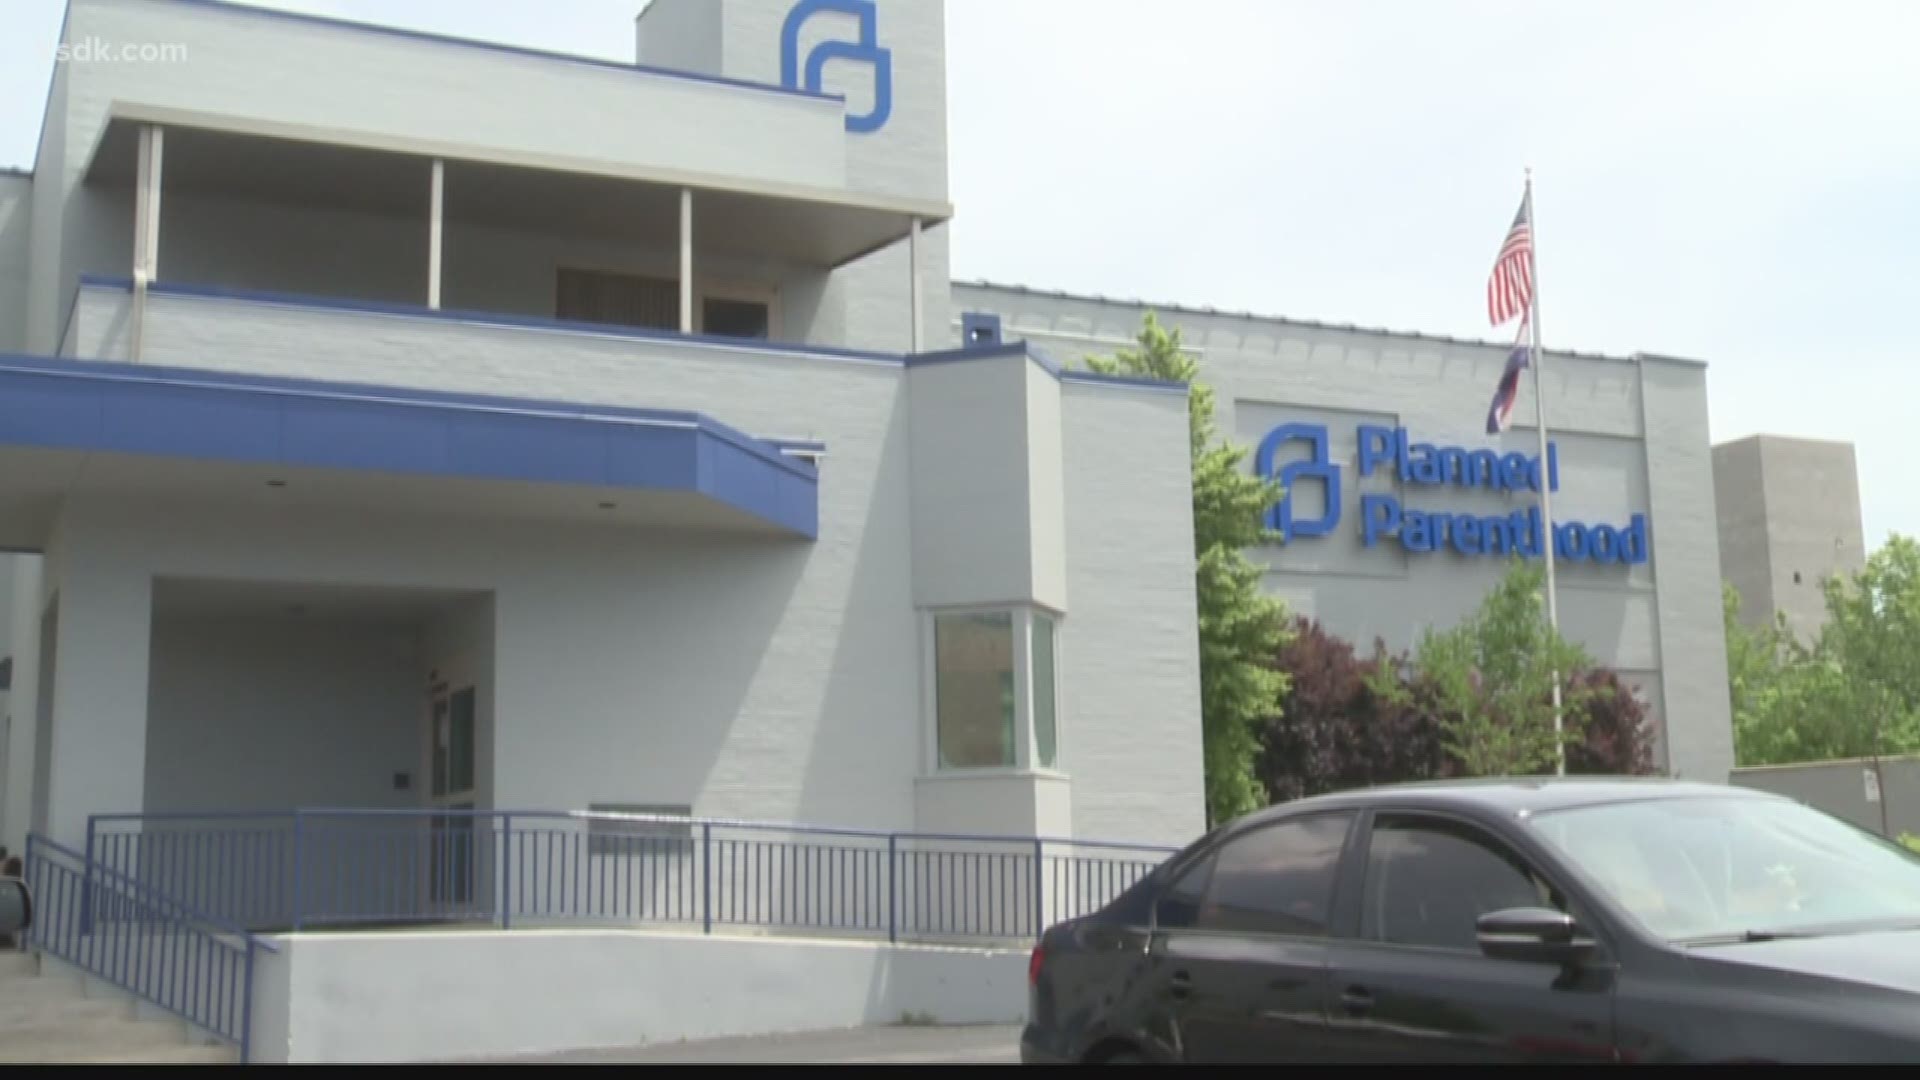 The long-term fate of Missouri's last abortion clinic is up in the air after its license to perform abortions was denied.